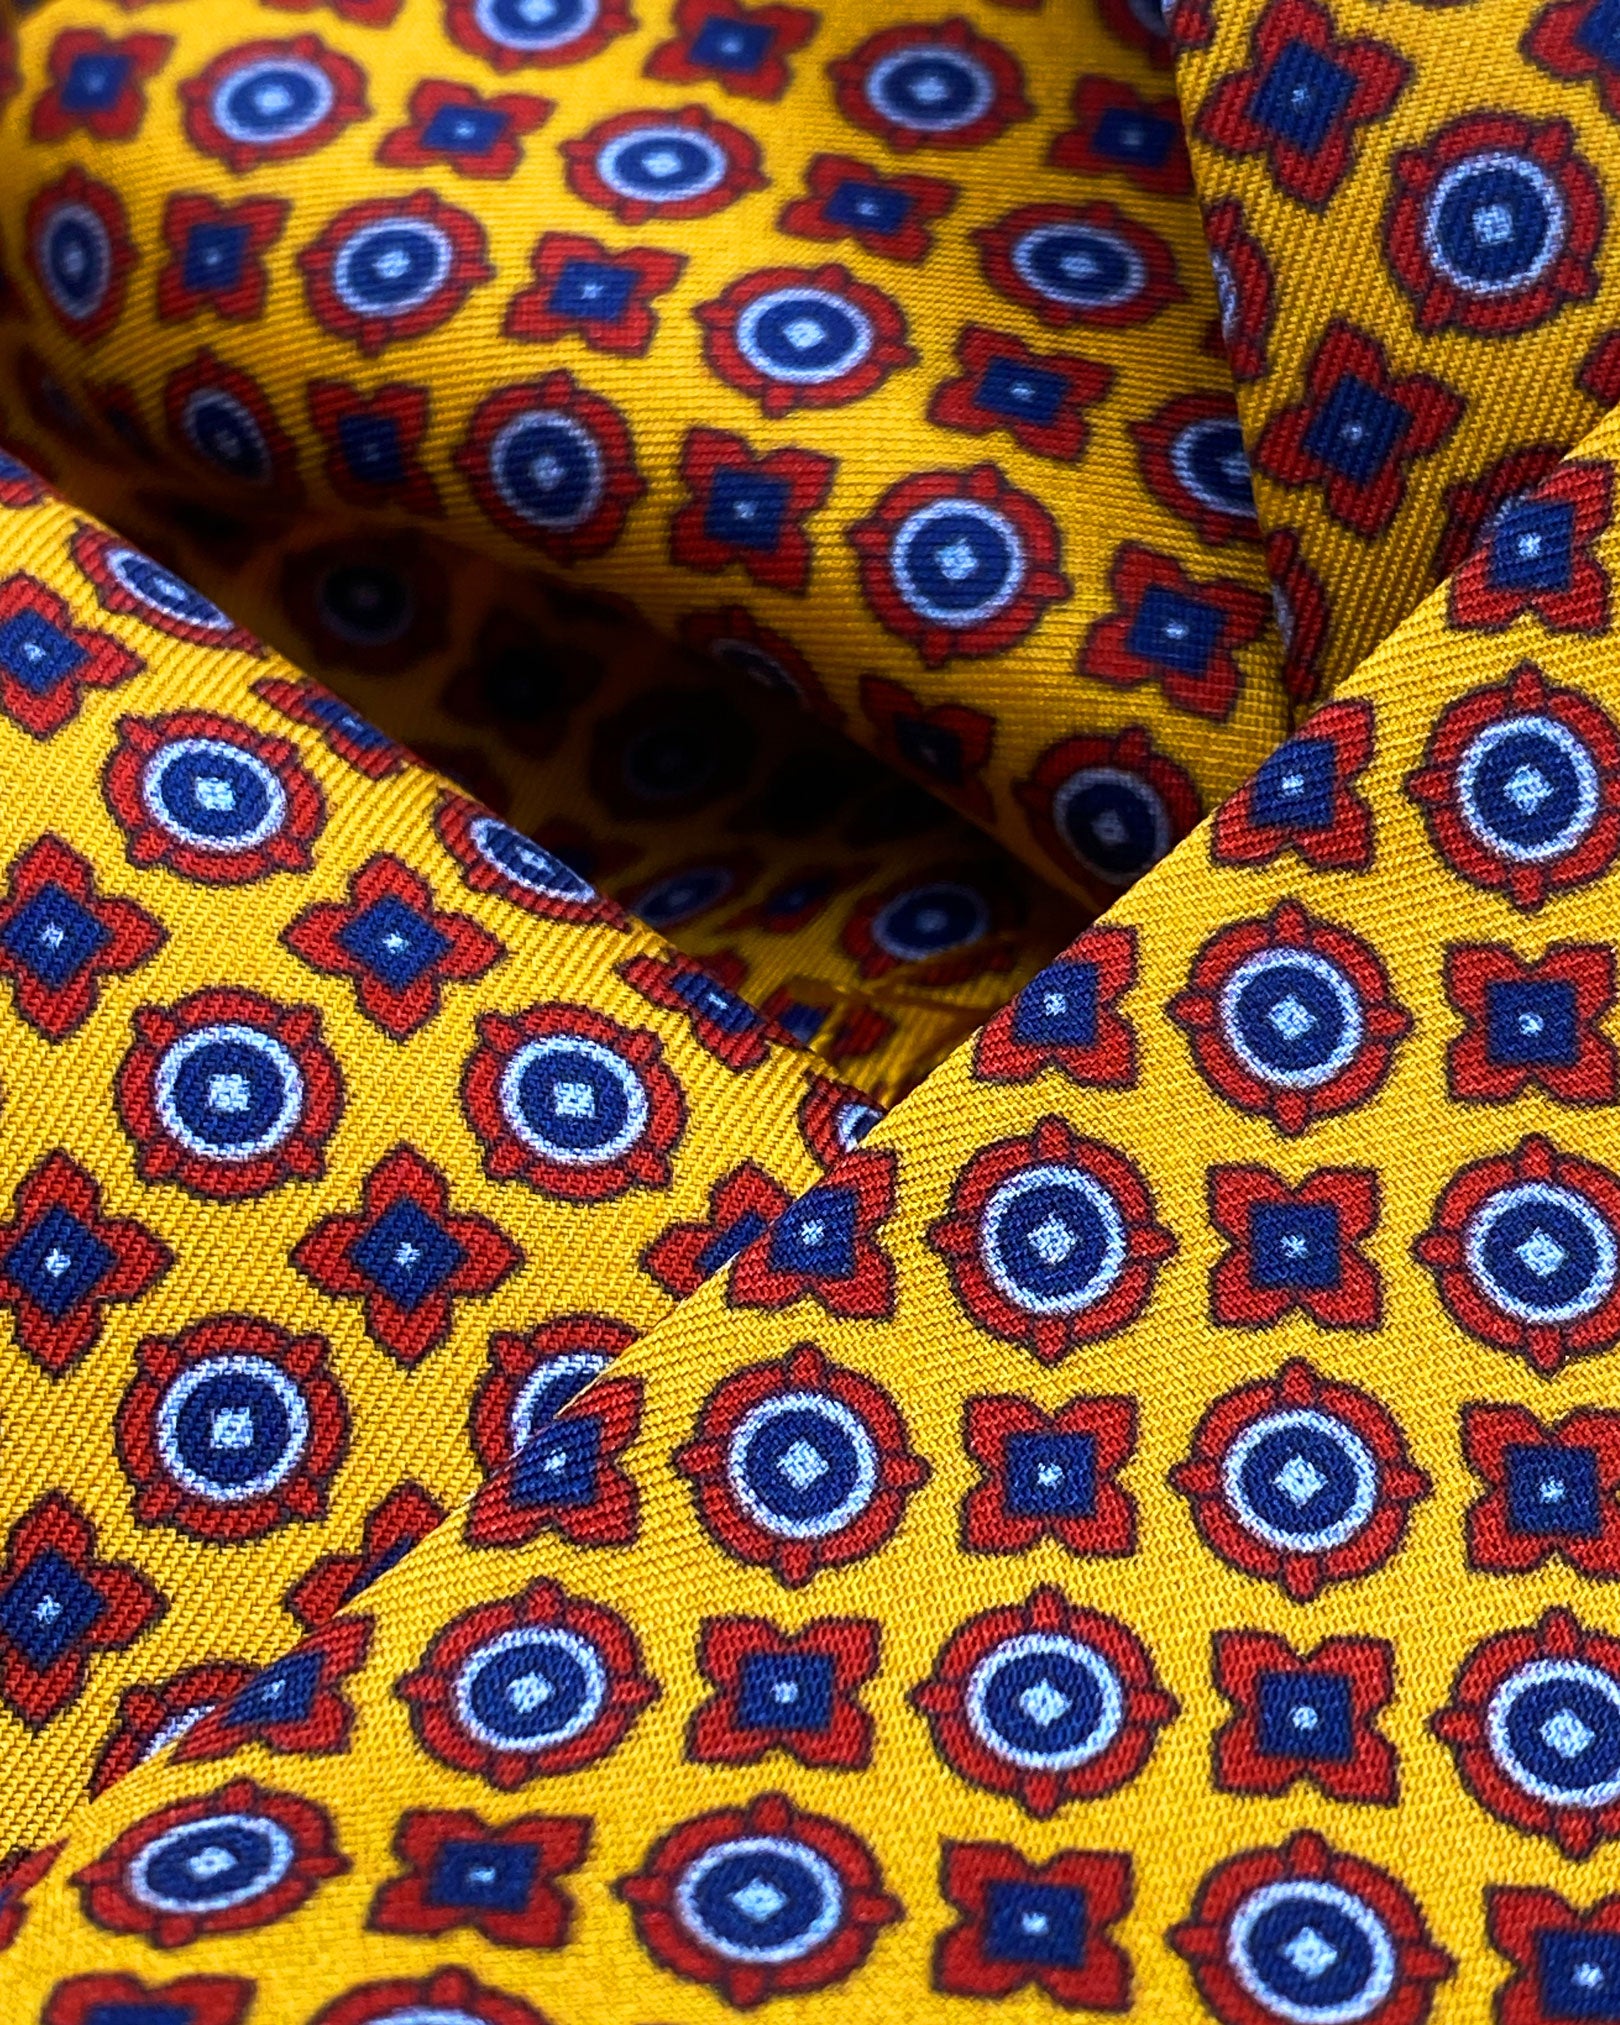 Ruffled close-up view of the Toshima silk aviator scarf, presenting a closer view of the small blue and red stylised floral patterns on a golden-orange ground and lustre of the material.